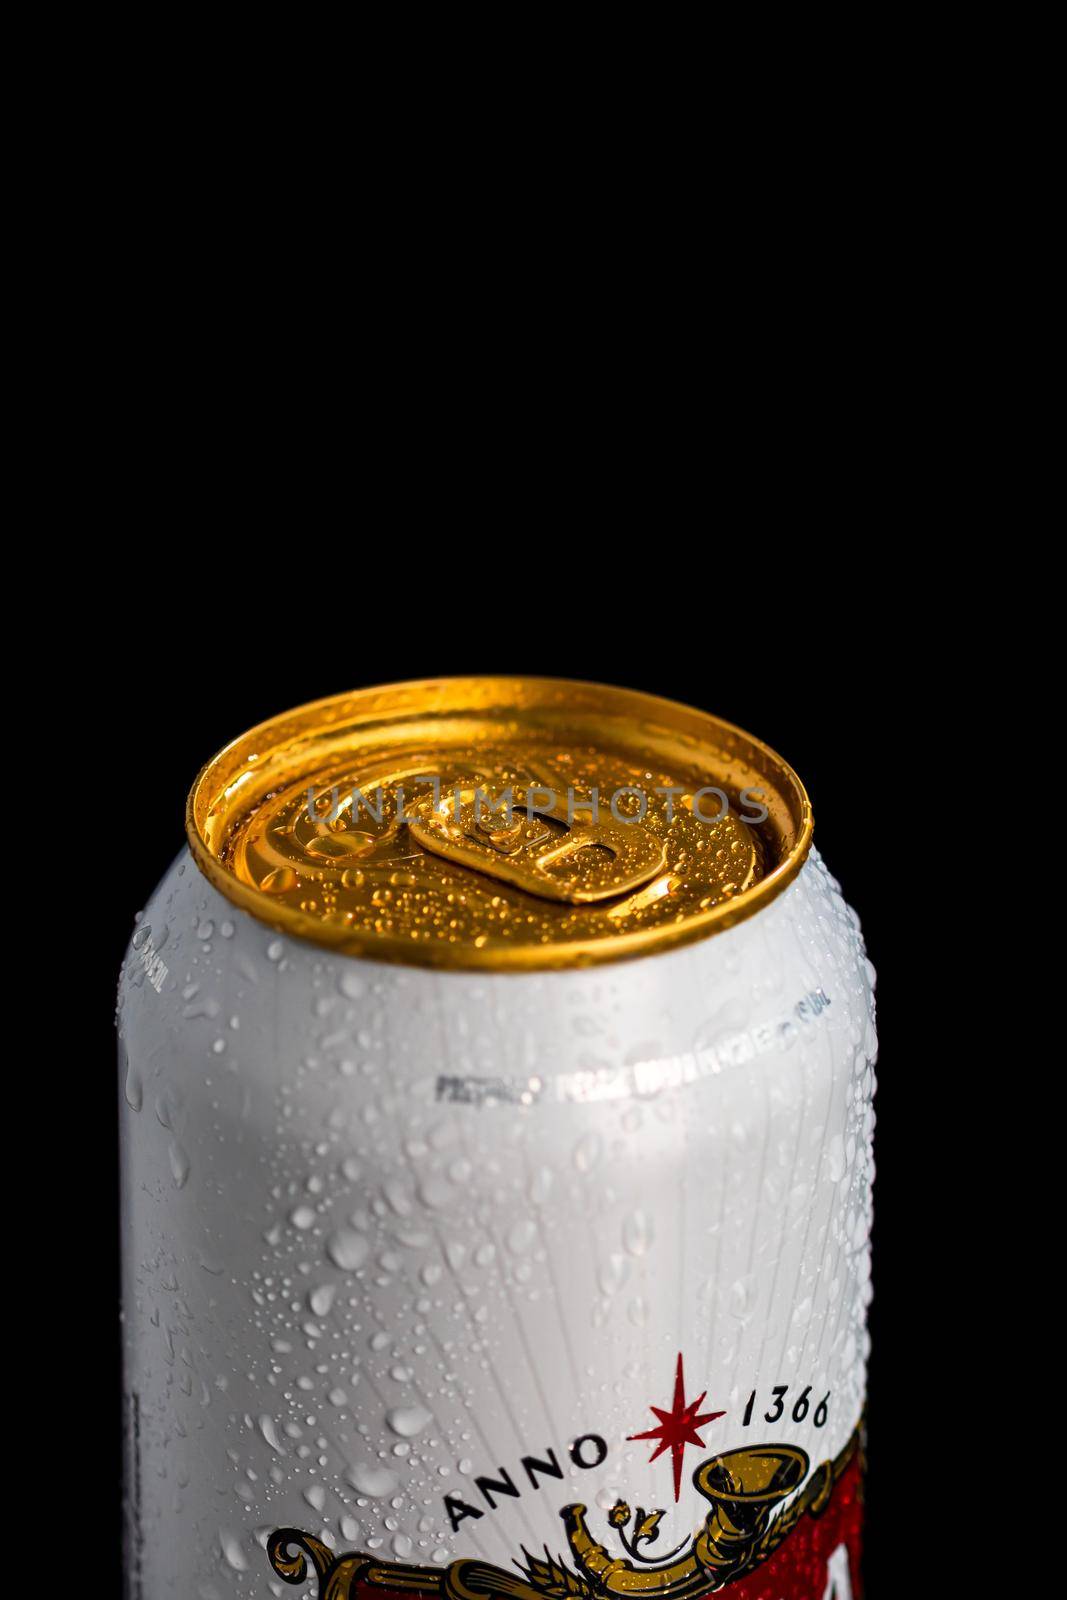 Condensation water droplets on Stella Artois beer can isolated on black. Bucharest, Romania, 2020